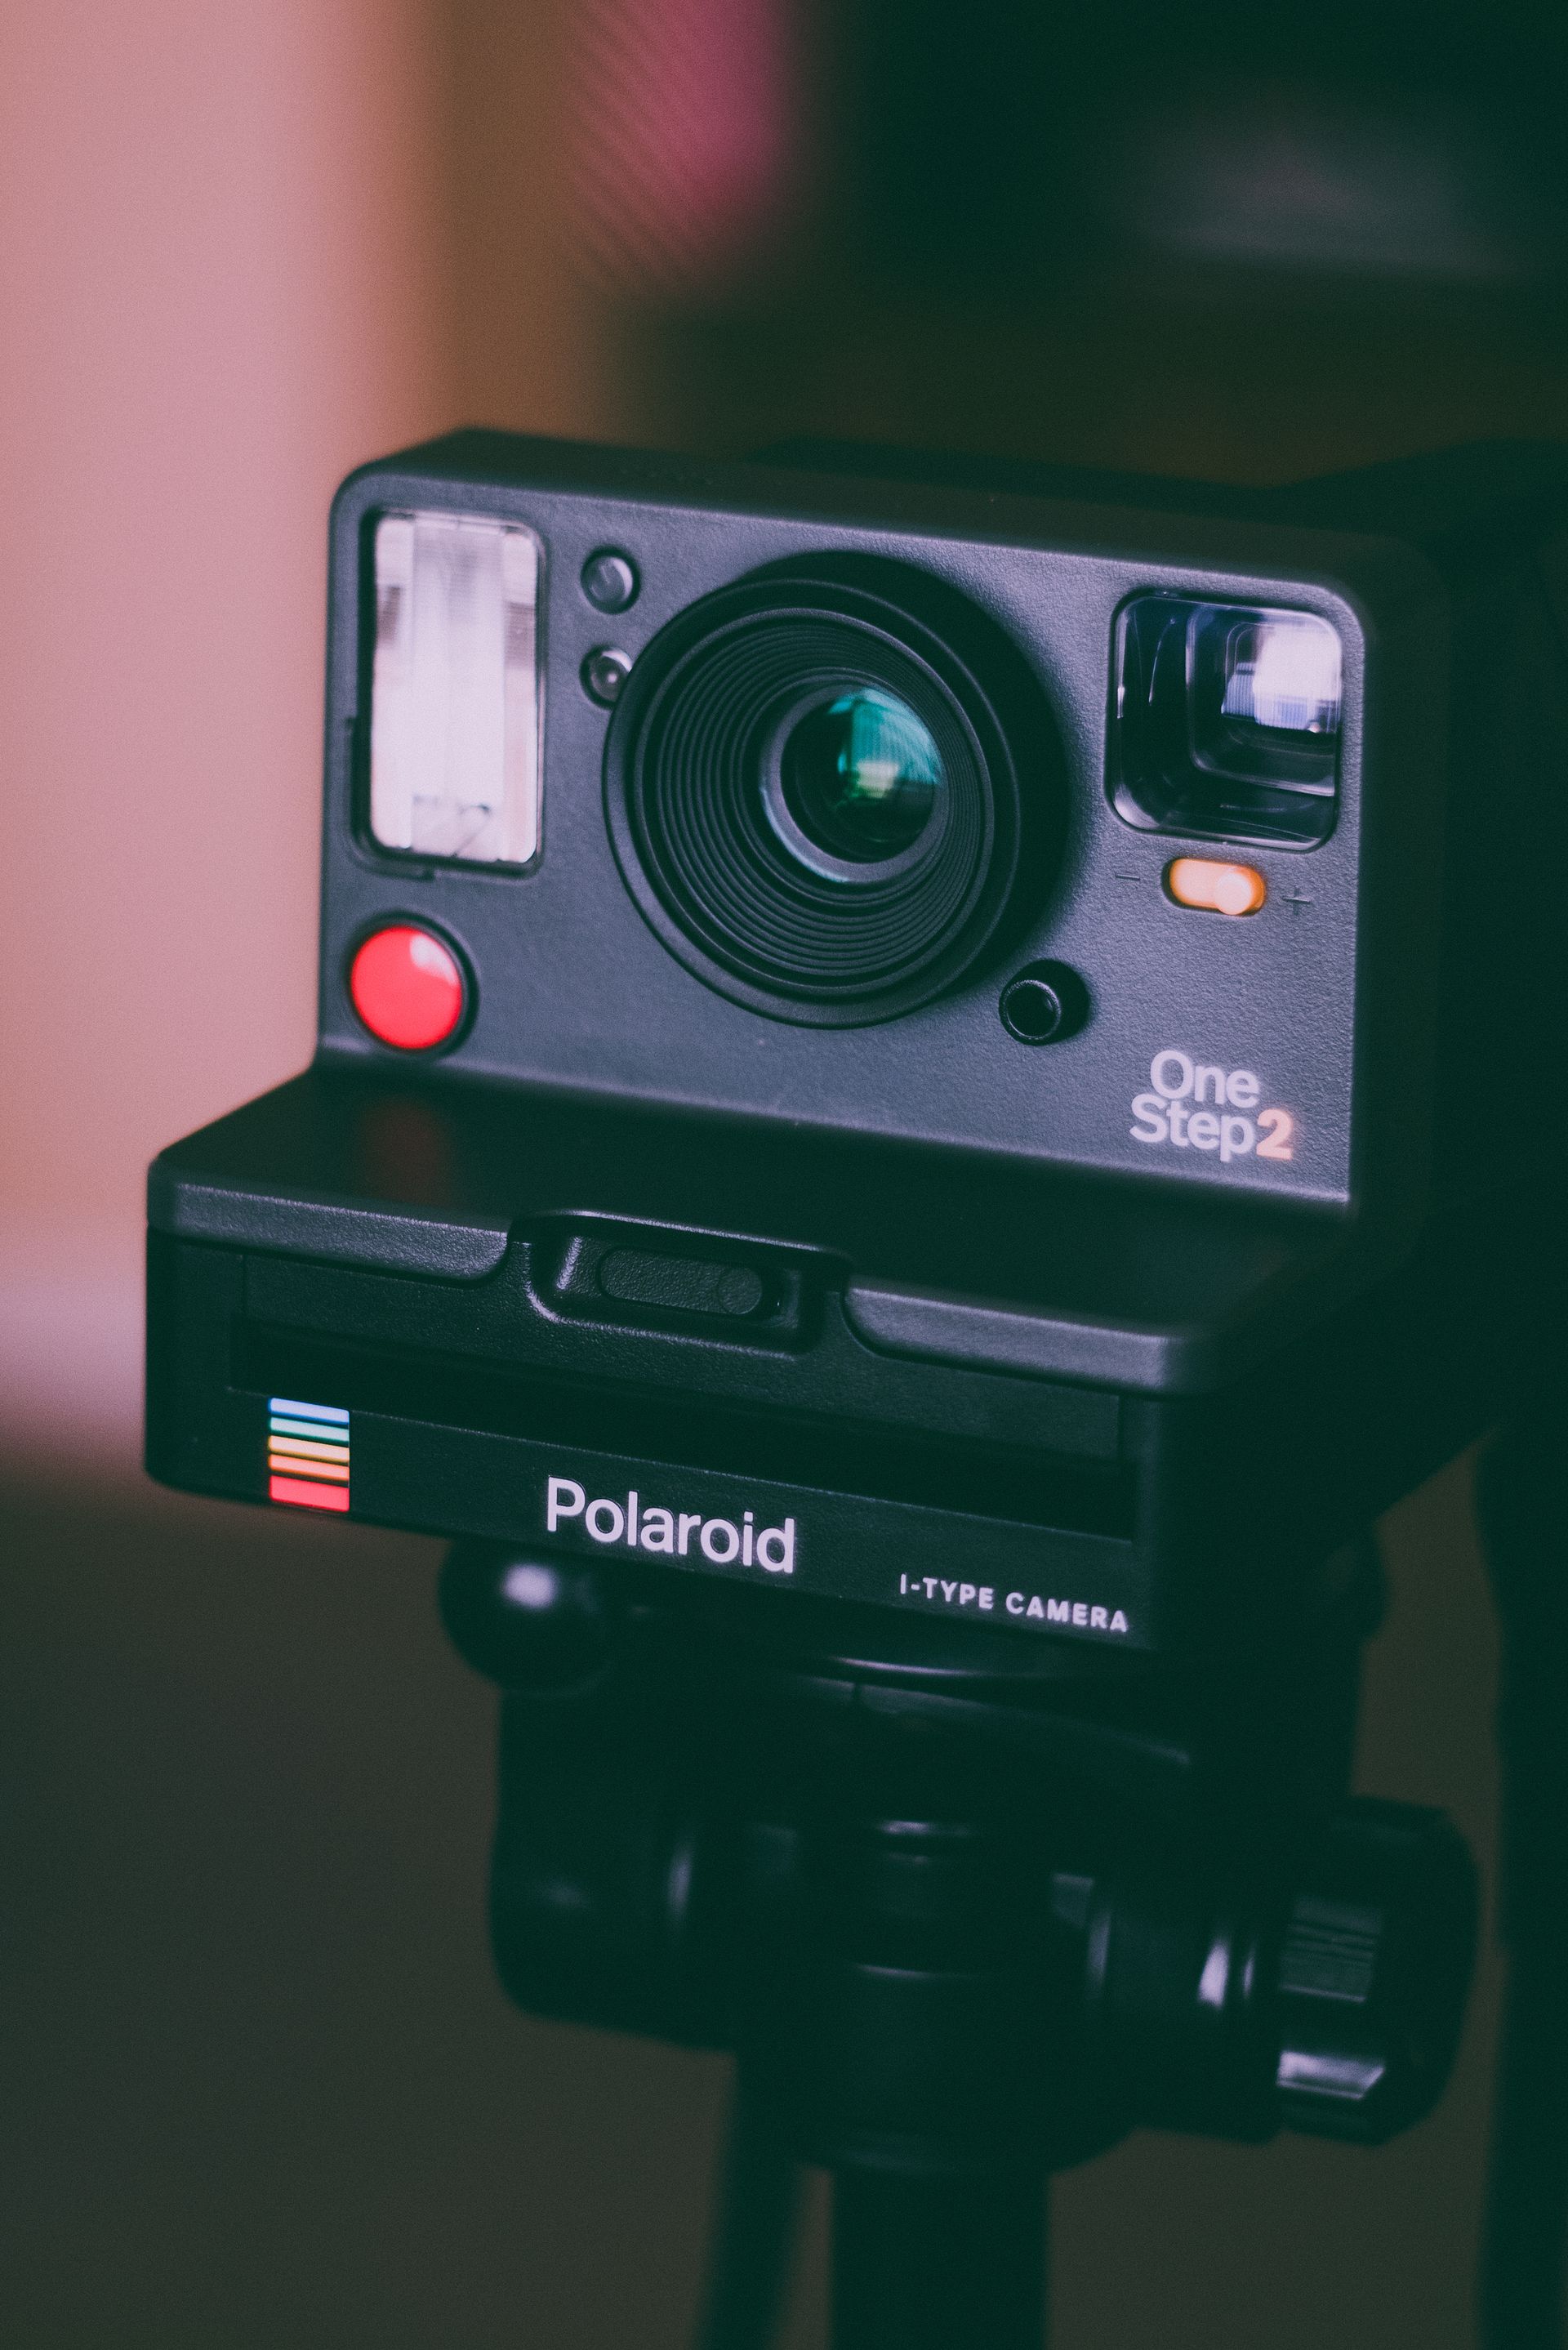 A charming vintage Polaroid camera to represent the Ever After Polaroid-style template